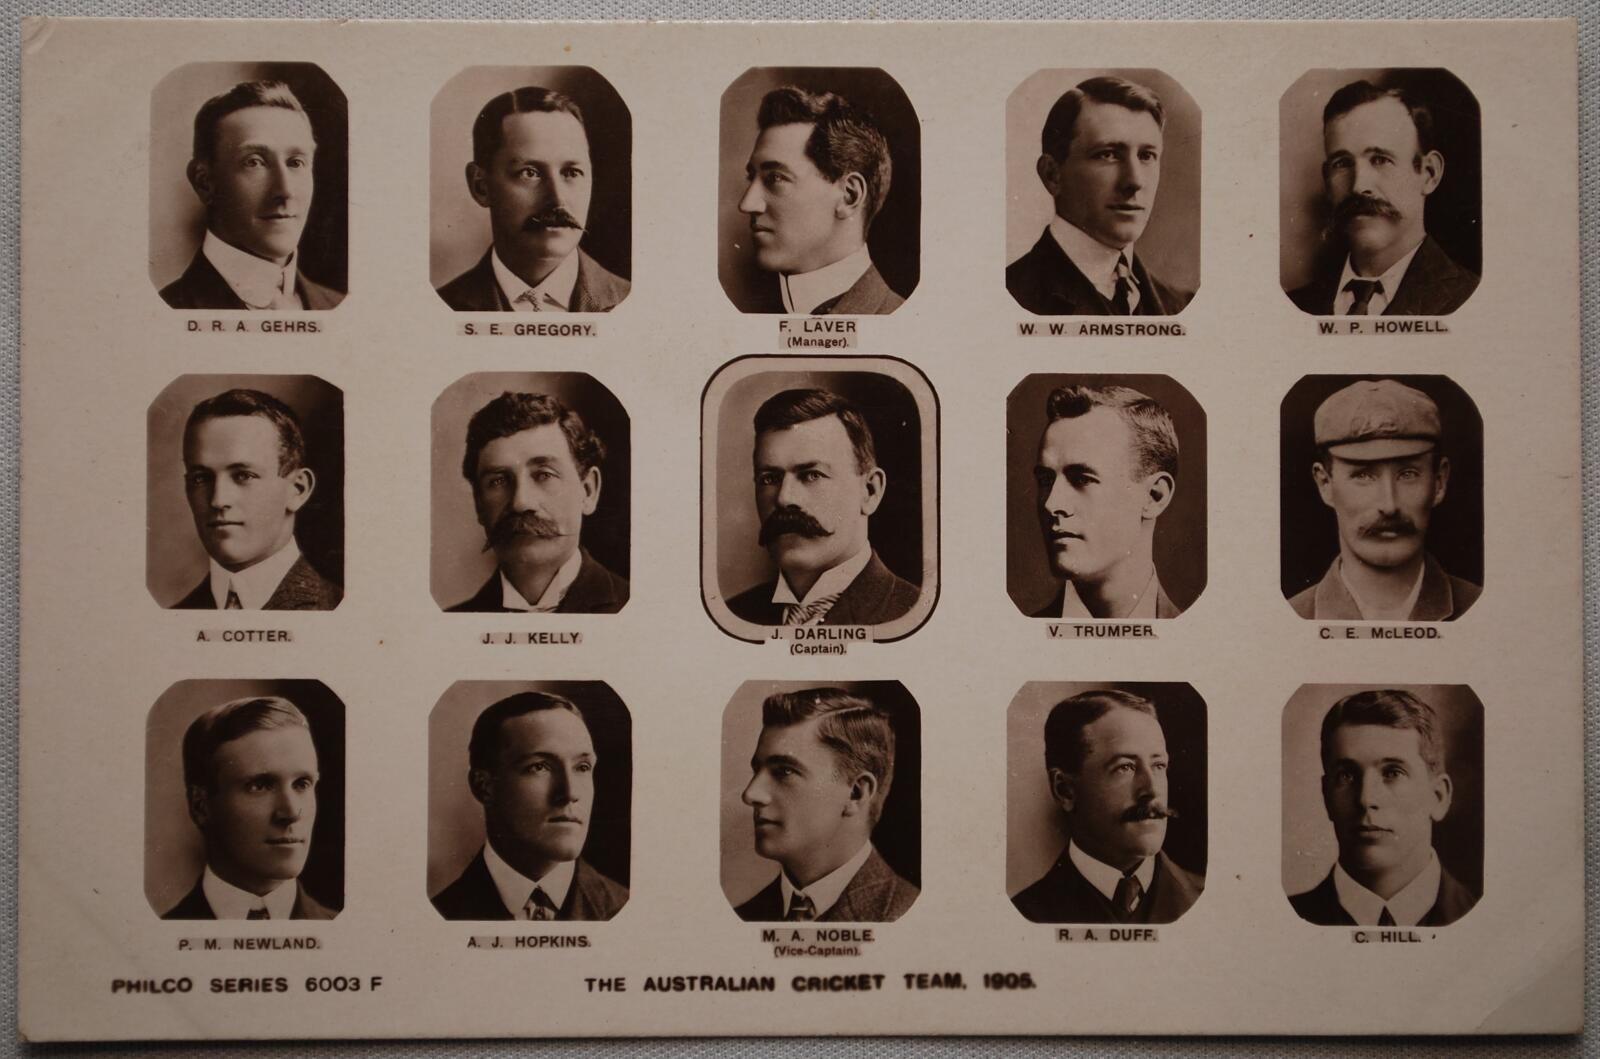 ?The Australian Cricket Team 1905?. Mono real photograph postcard of the fifteen members of the